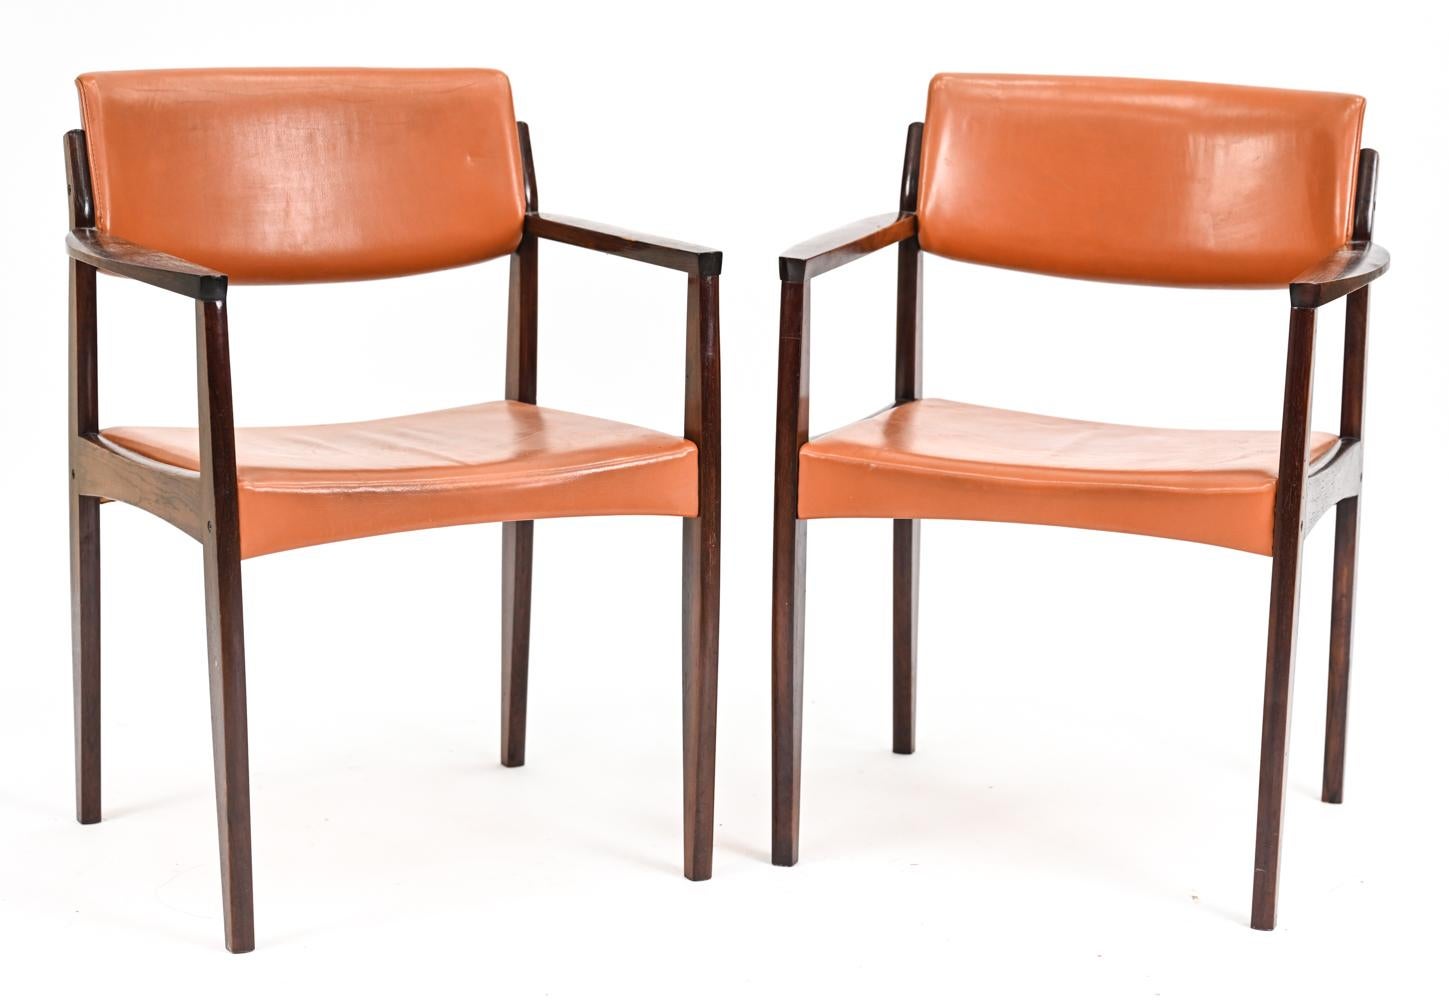 An attractive pair of Danish mid-century armchairs in orange leather with modern angular frames in handsome rosewood. A stylish pair for use at either end of a dining table or accent pieces in a living space. 
No manufacturer's labels present.